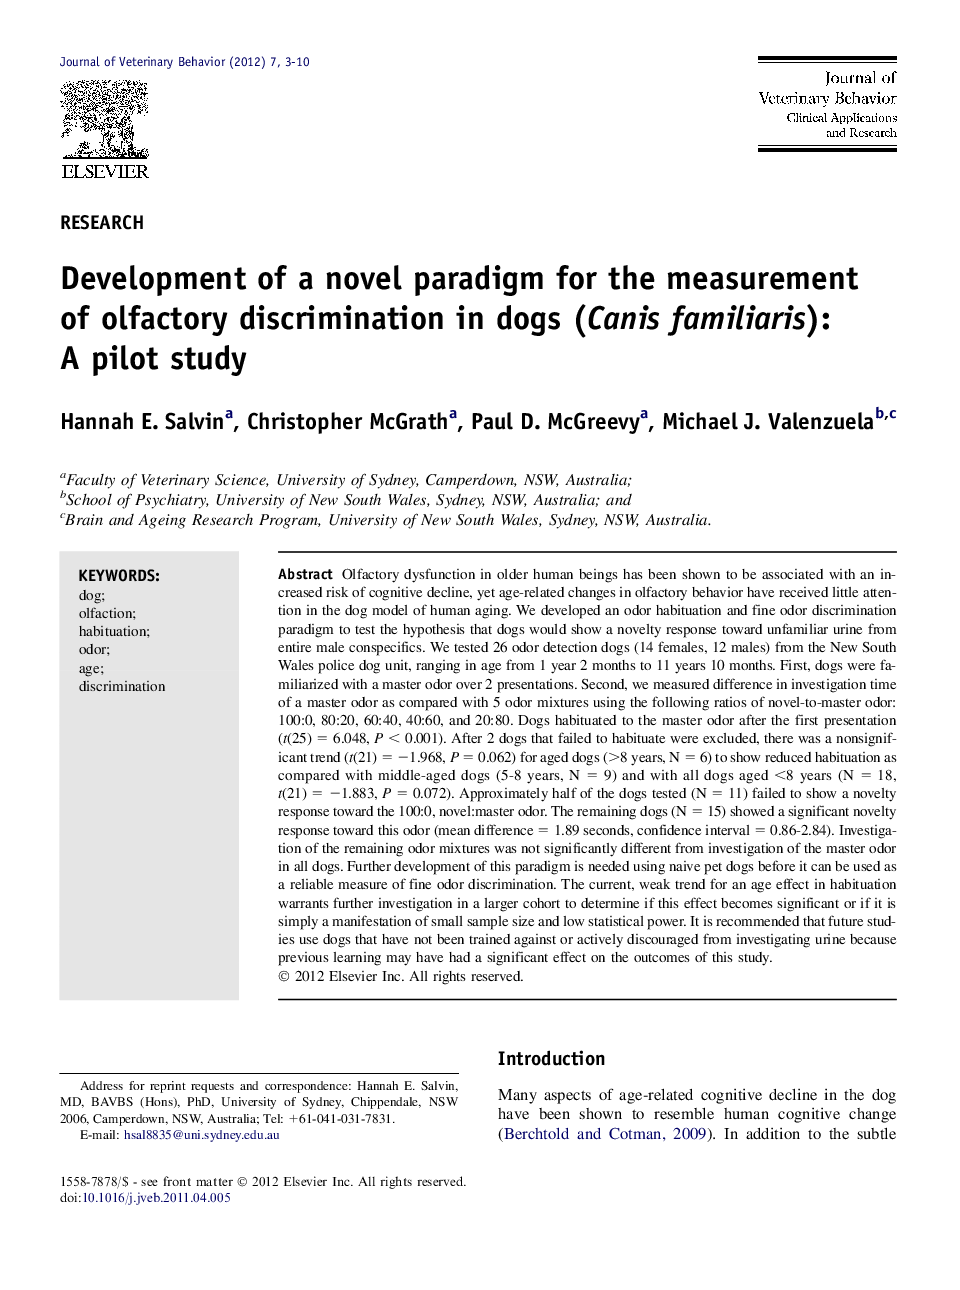 Development of a novel paradigm for the measurement of olfactory discrimination in dogs (Canis familiaris): A pilot study